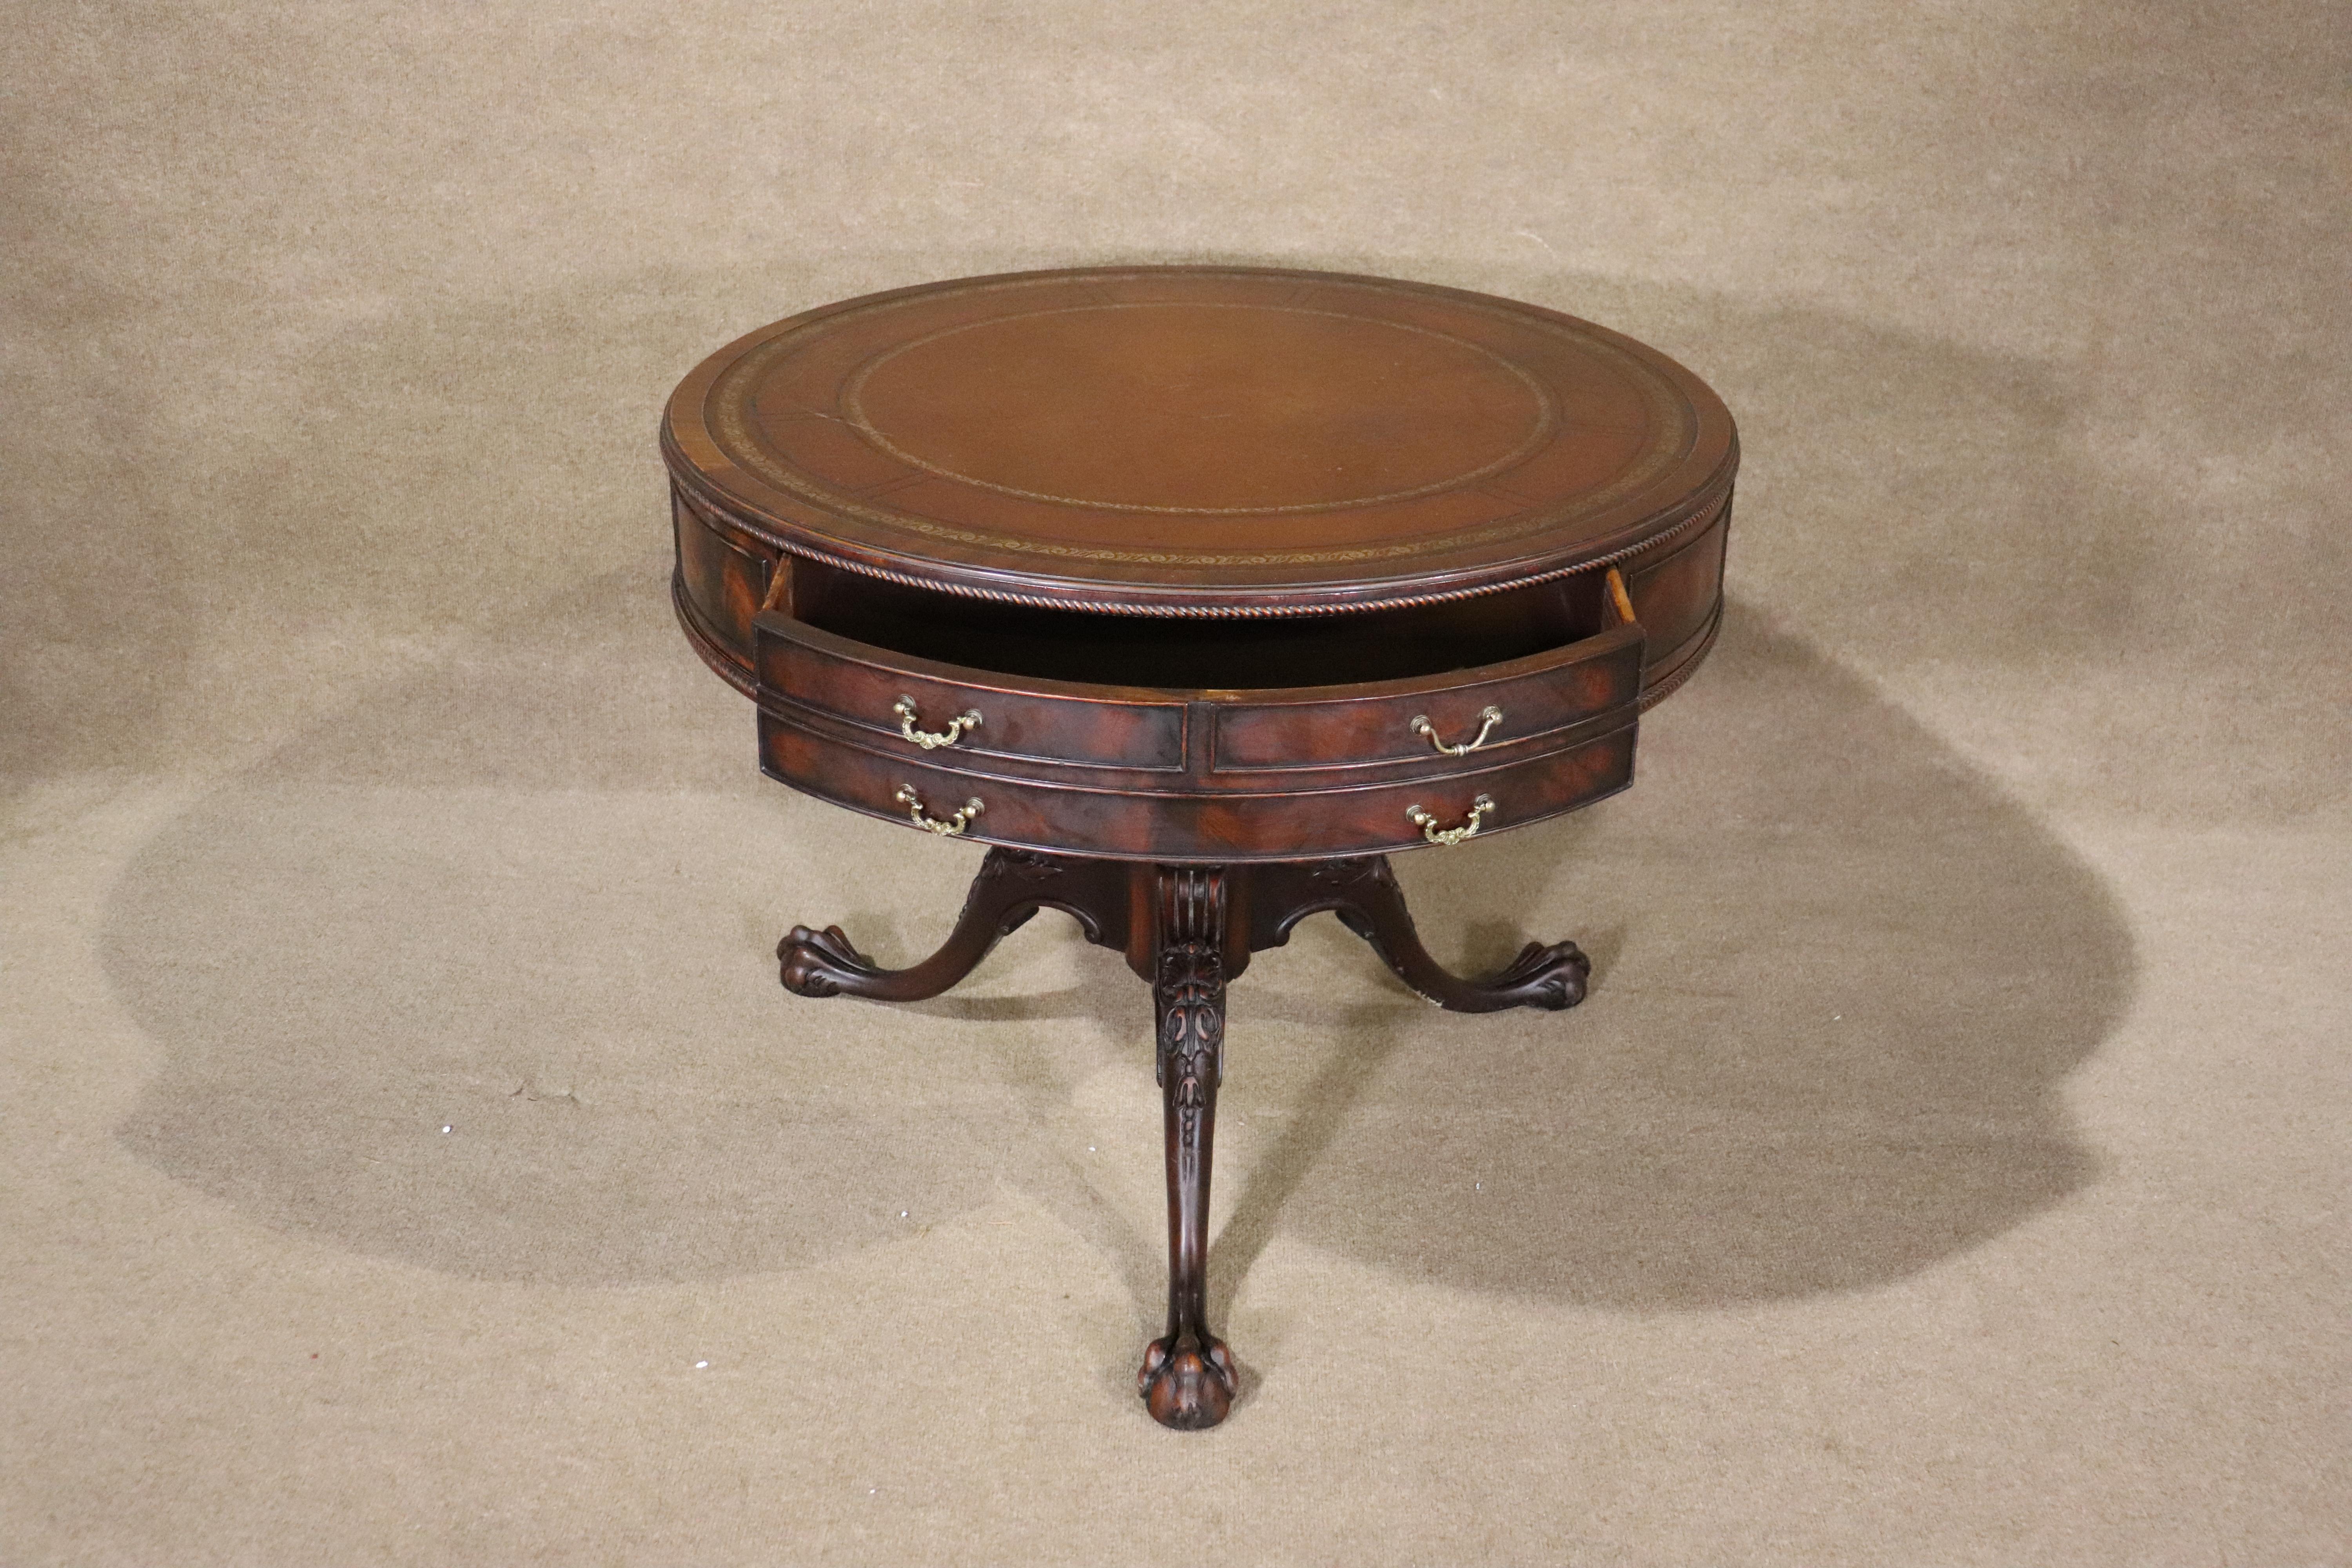 This round drum table features aged leather top, storage drawer and carved claw feet. The frame is carved mahogany with brass hardware and a carved base.
Please confirm location NY or NJ